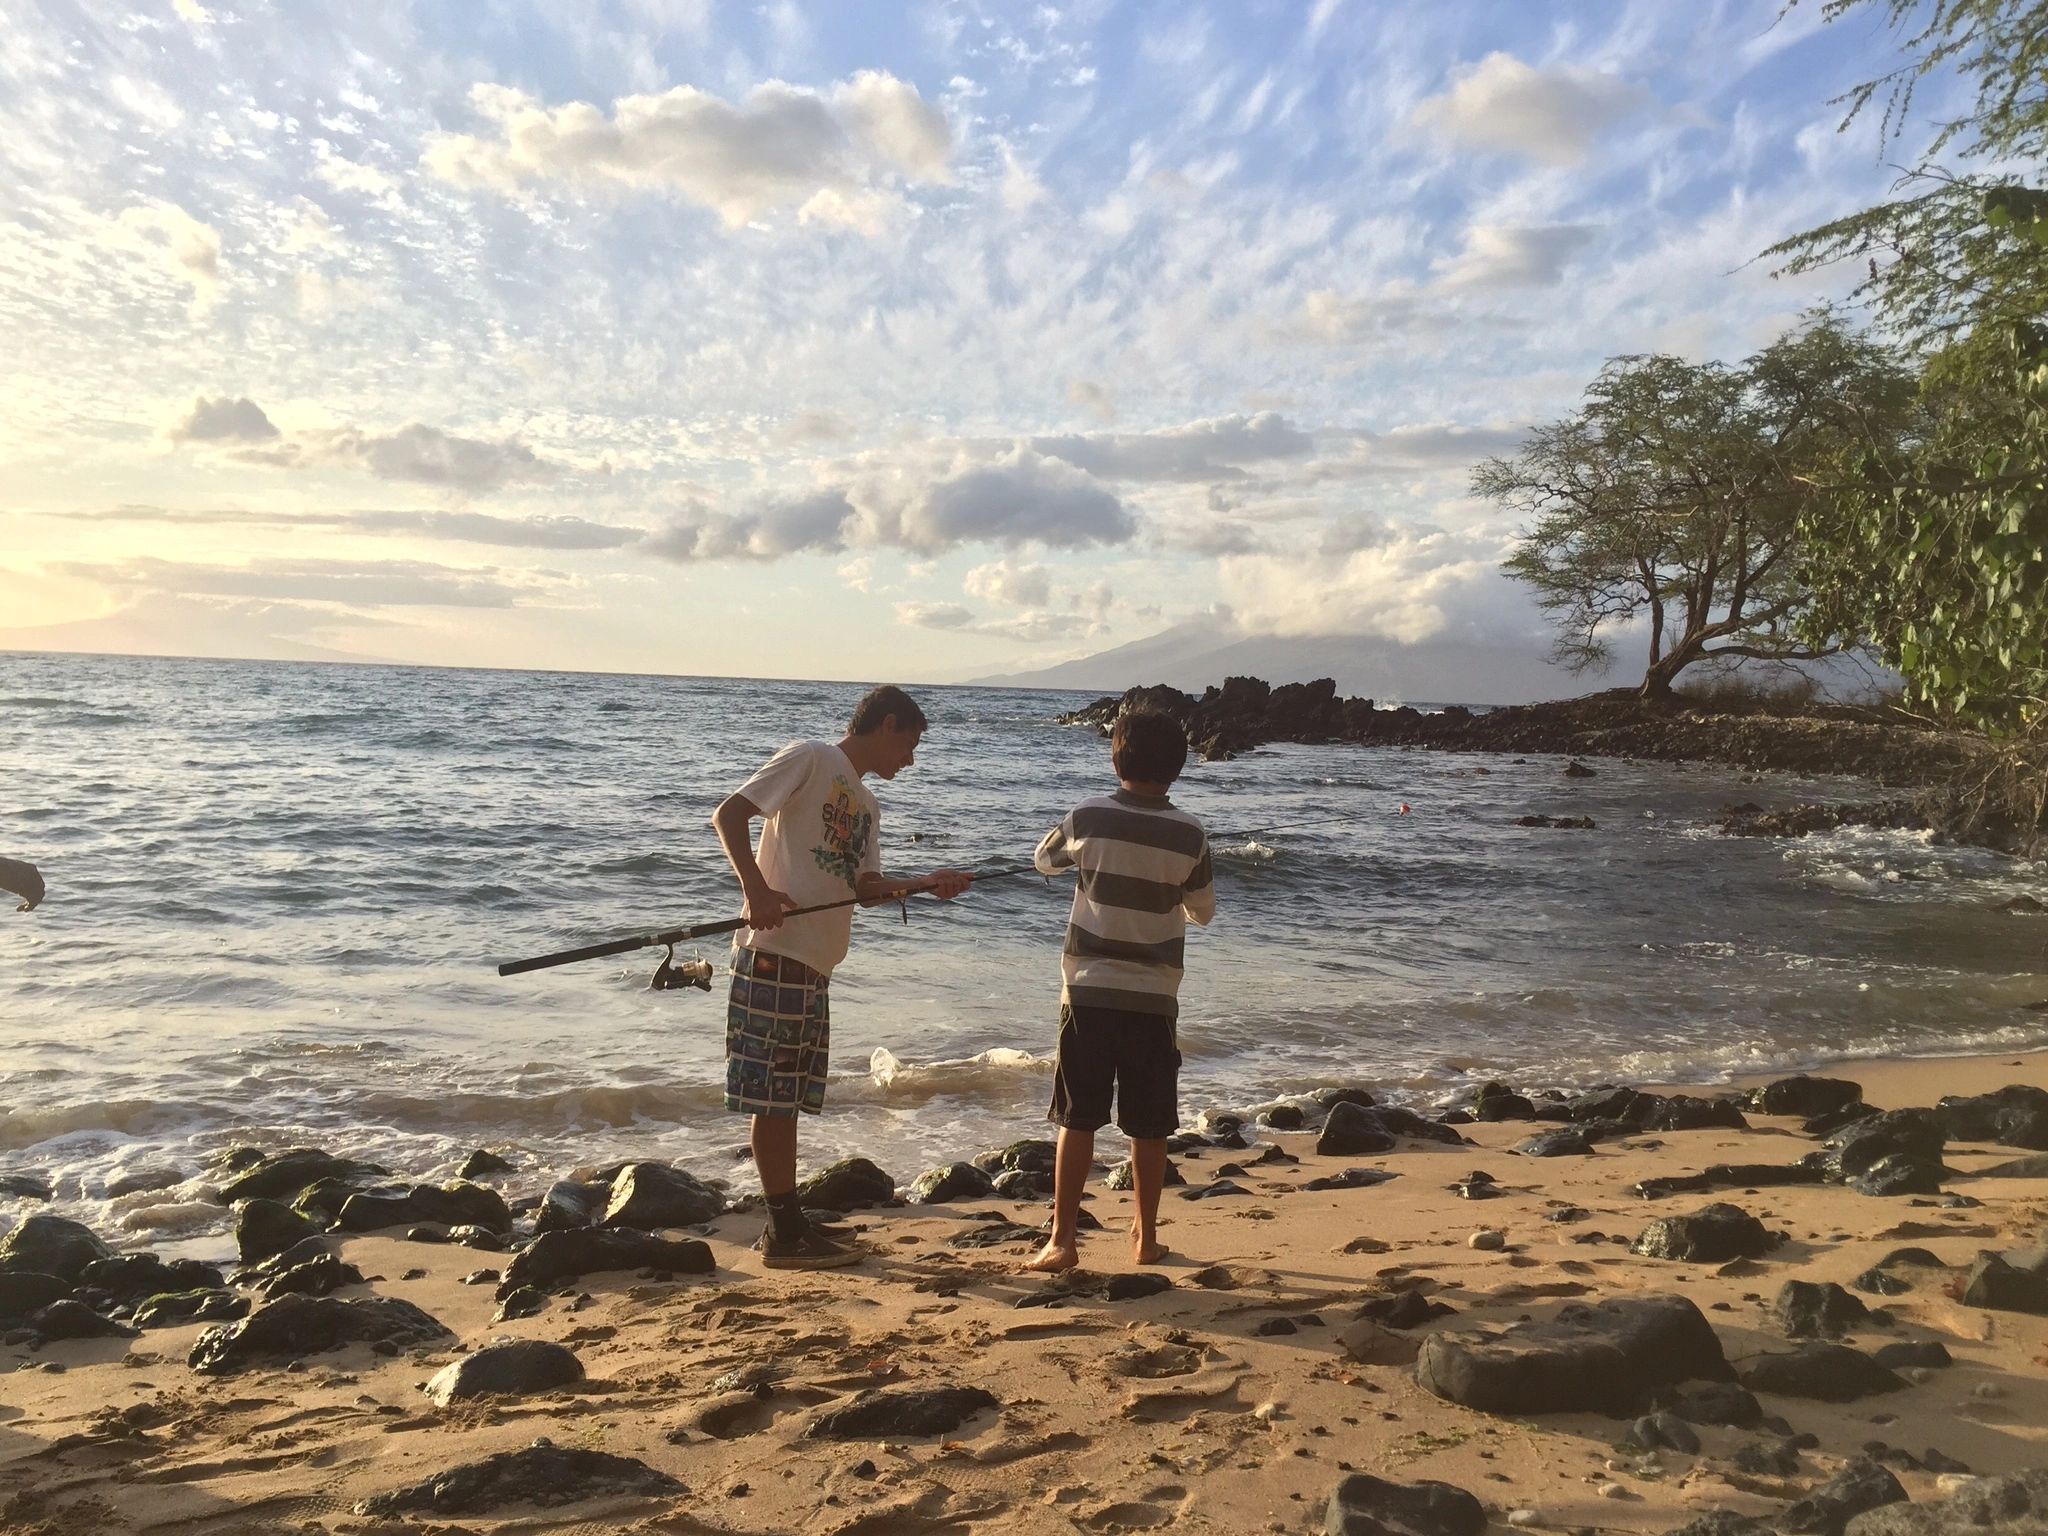 Two brothers, Kolomona and Kaulana, work together to string a fishing pole.  Working together, we ac